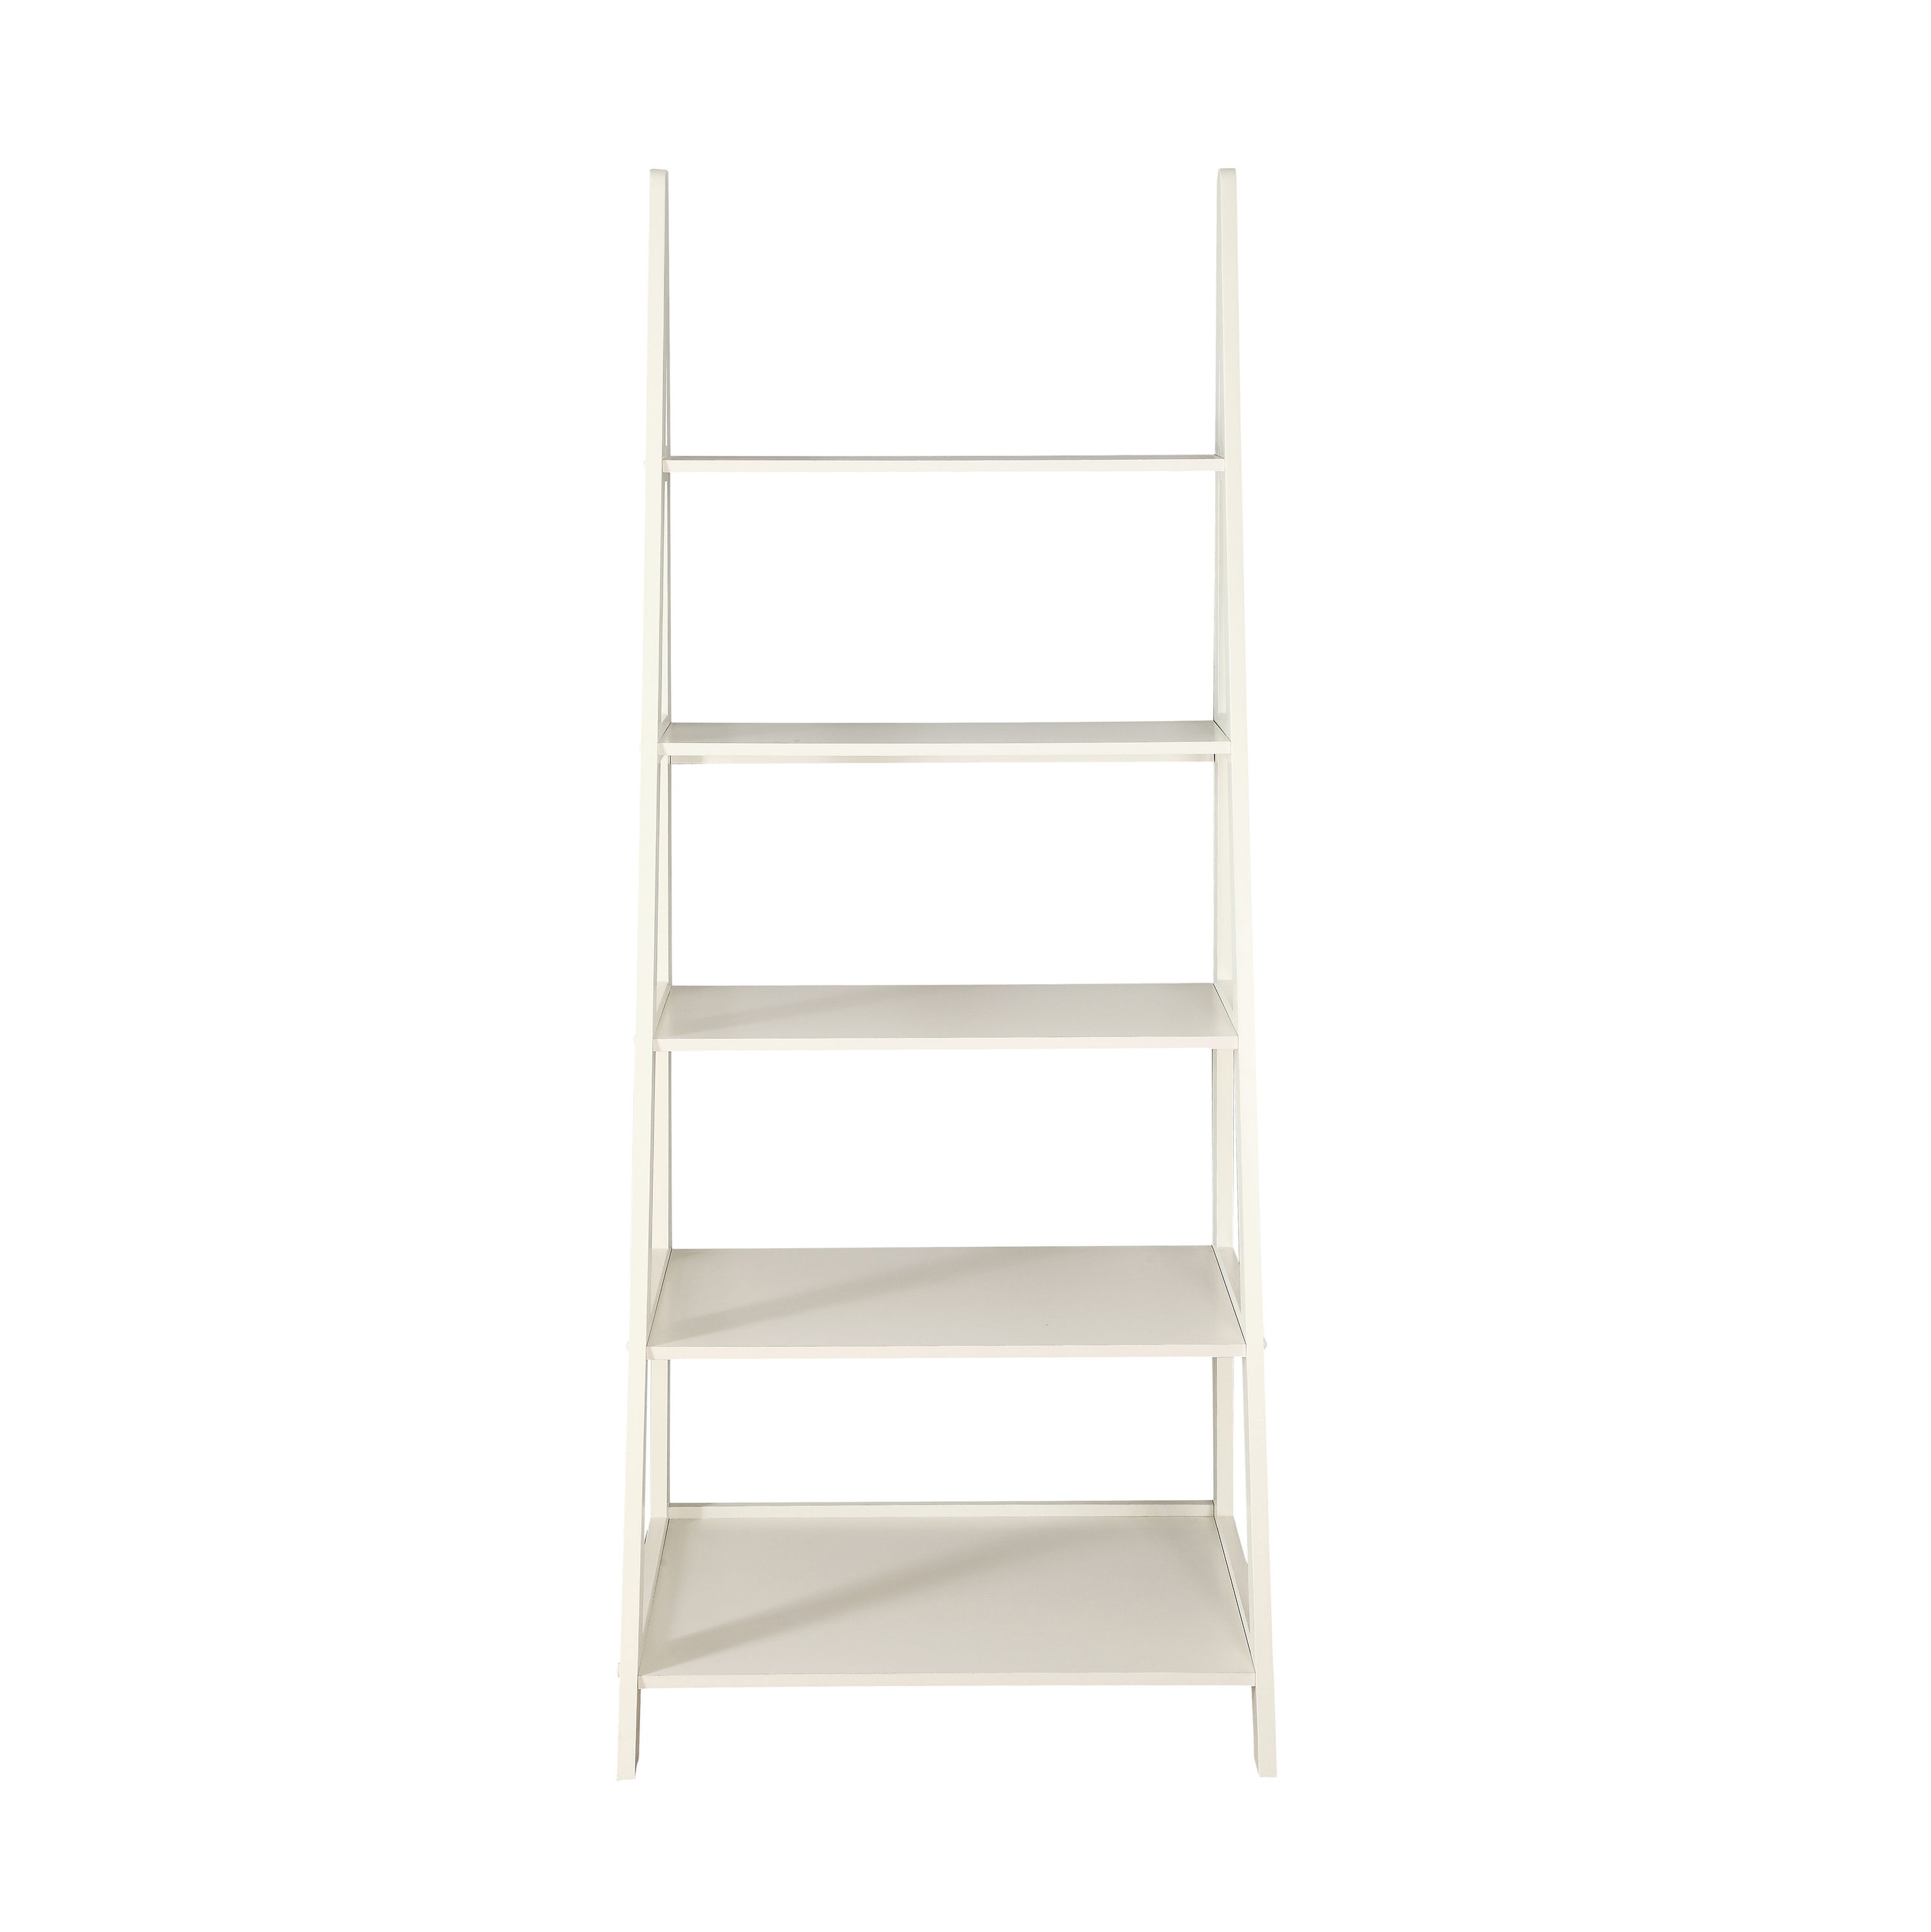 Bevestigen Vooruitzien Neerduwen Belray Home Furnishings & Decor Center Ladder Polar Off-white Wood 5-Shelf  Ladder Bookcase (18-in W x 72-in H x 28-in D) in the Bookcases department  at Lowes.com